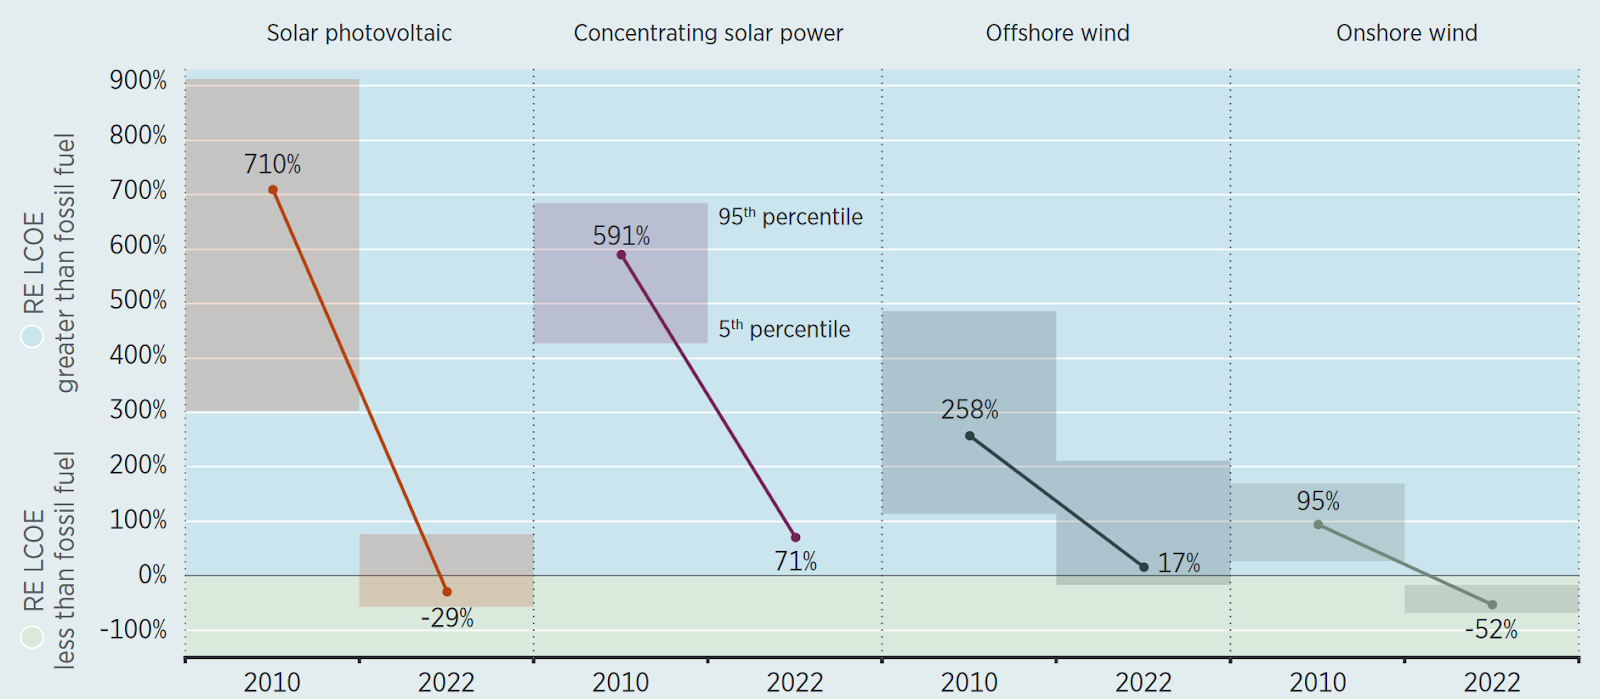 Change in Competitiveness of Solar and Wind by Country Based on Global Average LCOE, 2010 - 2022, Source: IRENA